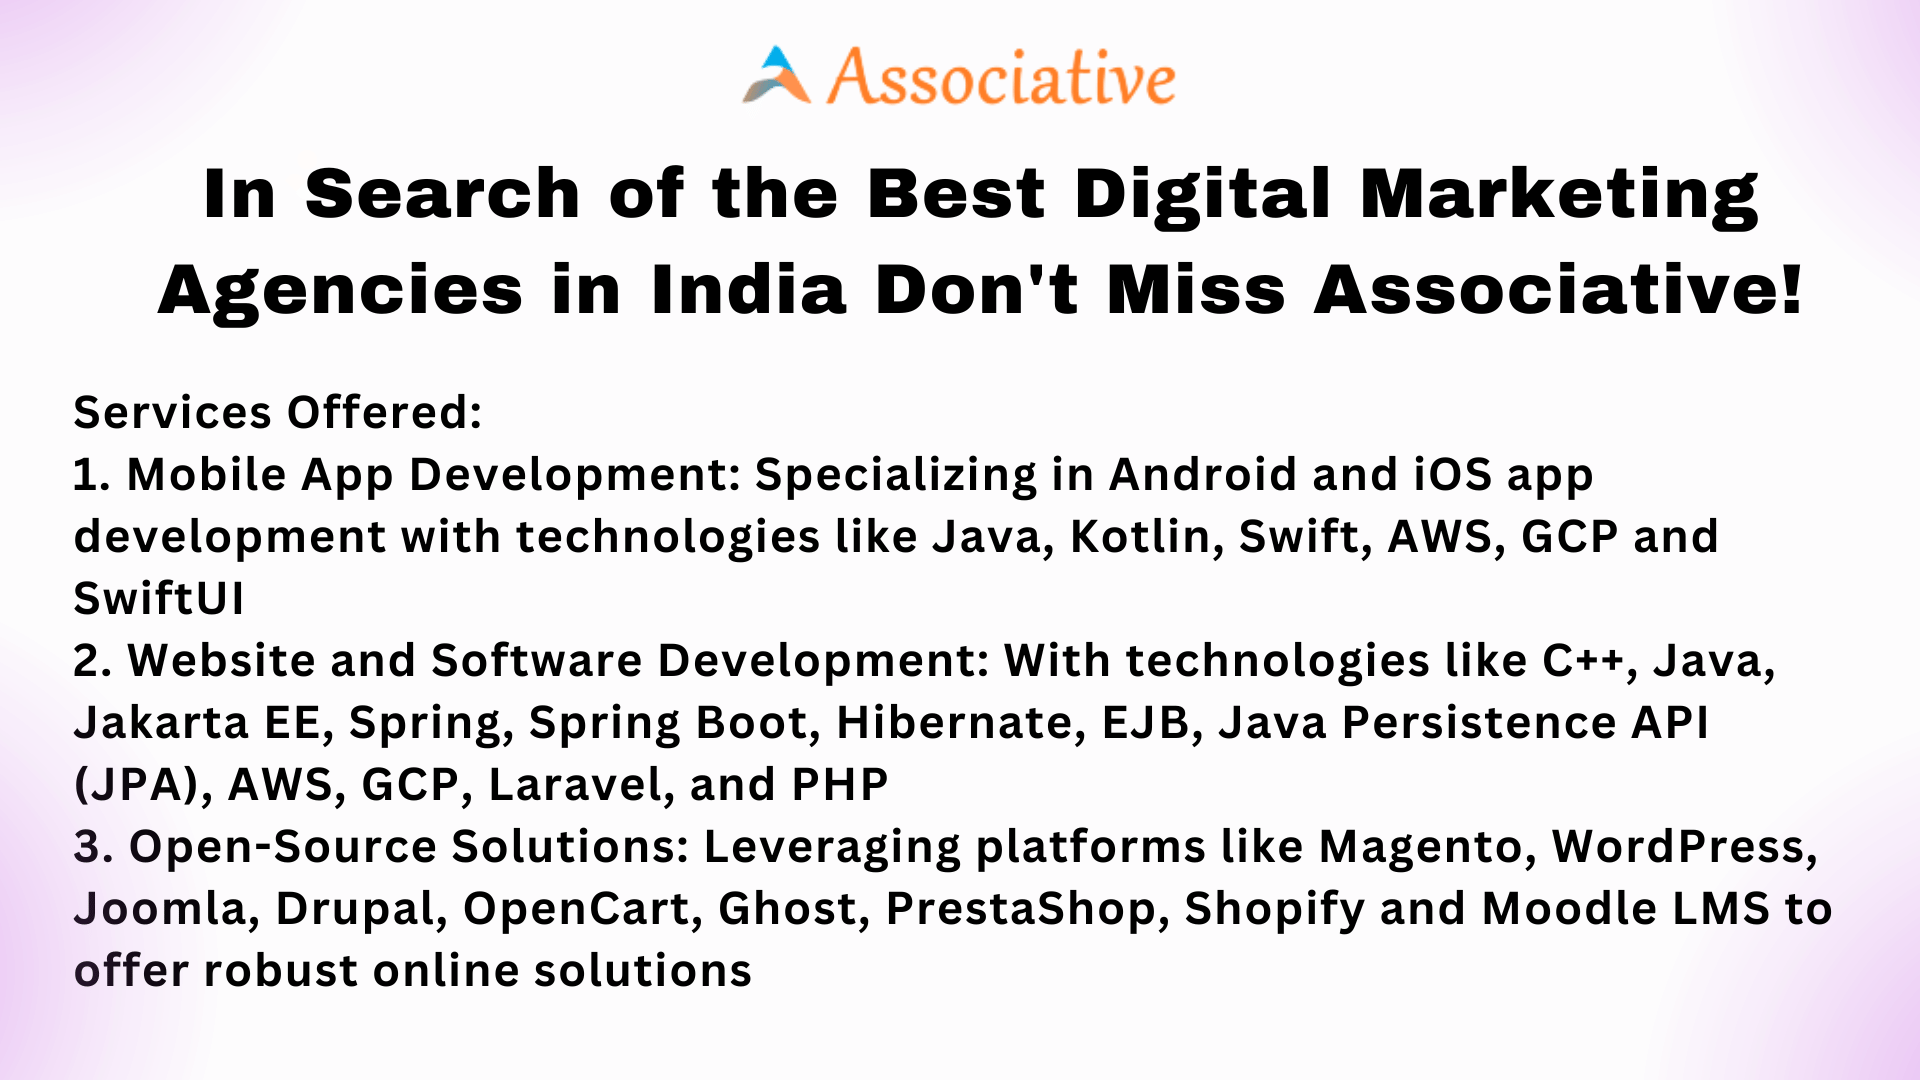 In Search of the Best Digital Marketing Agencies in India Don't Miss Associative!